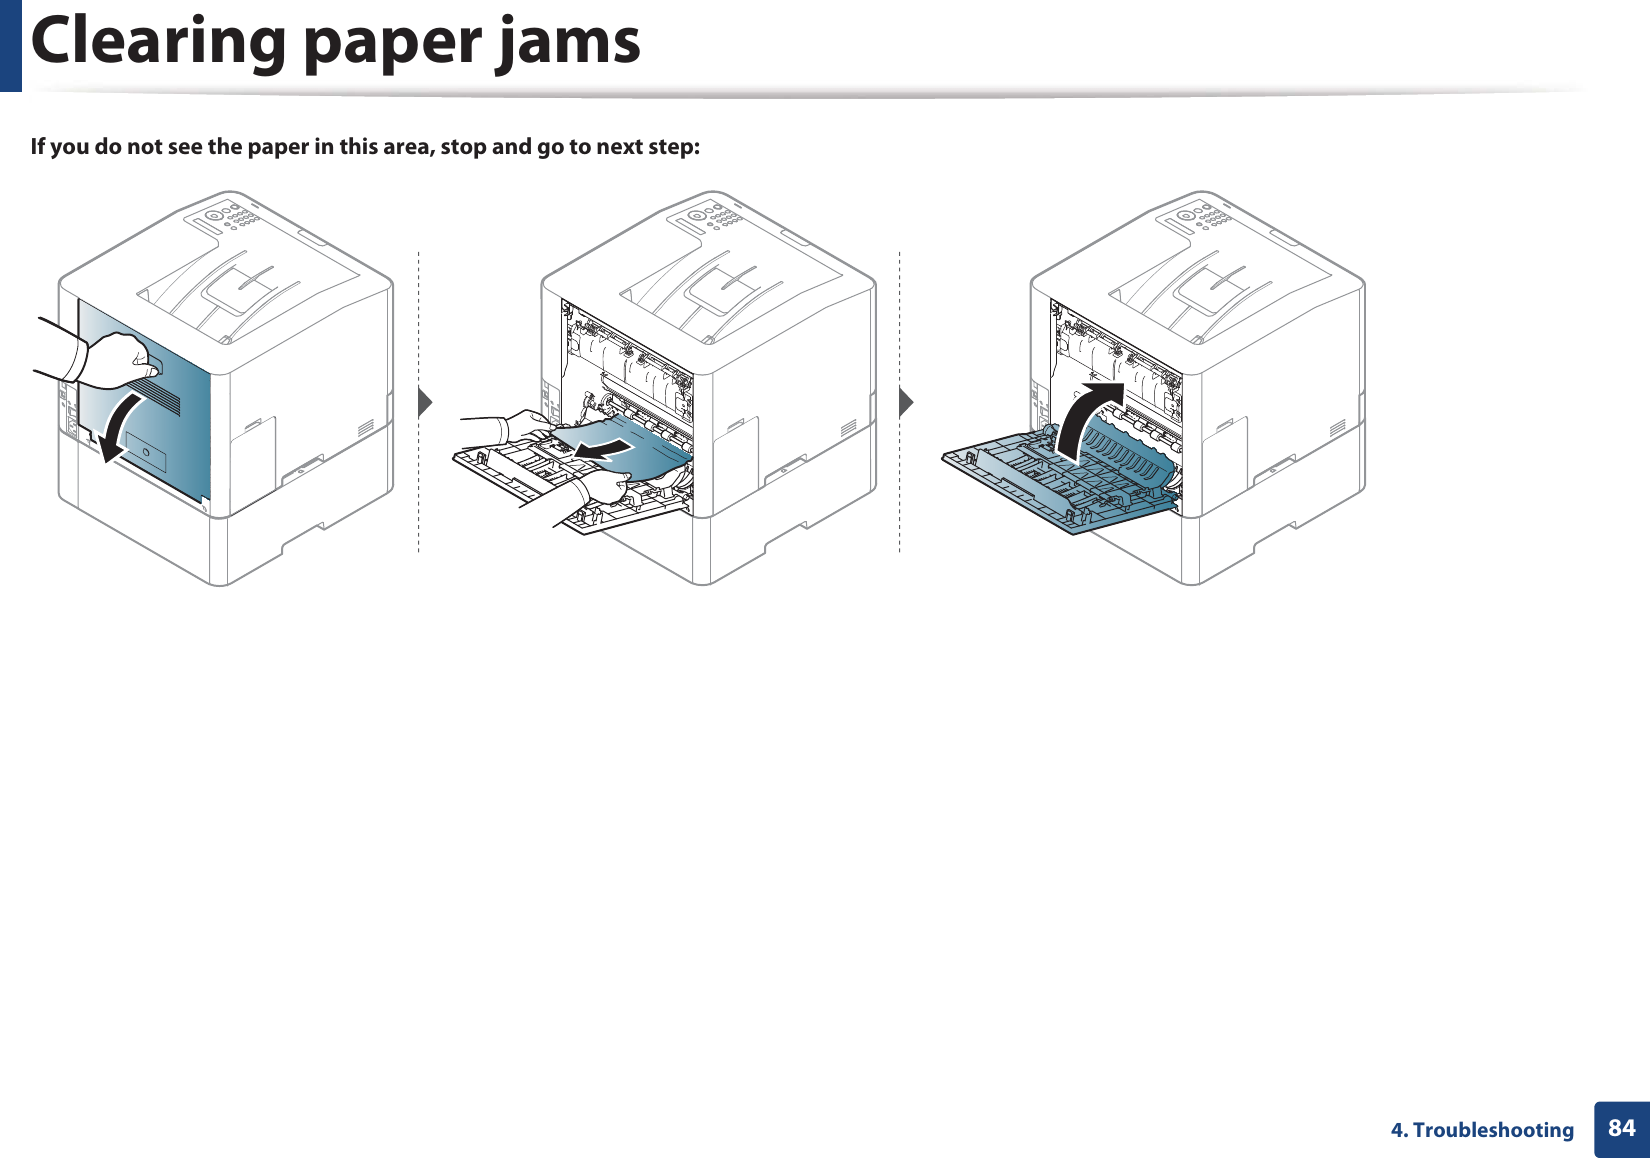 Clearing paper jams844. TroubleshootingIf you do not see the paper in this area, stop and go to next step: